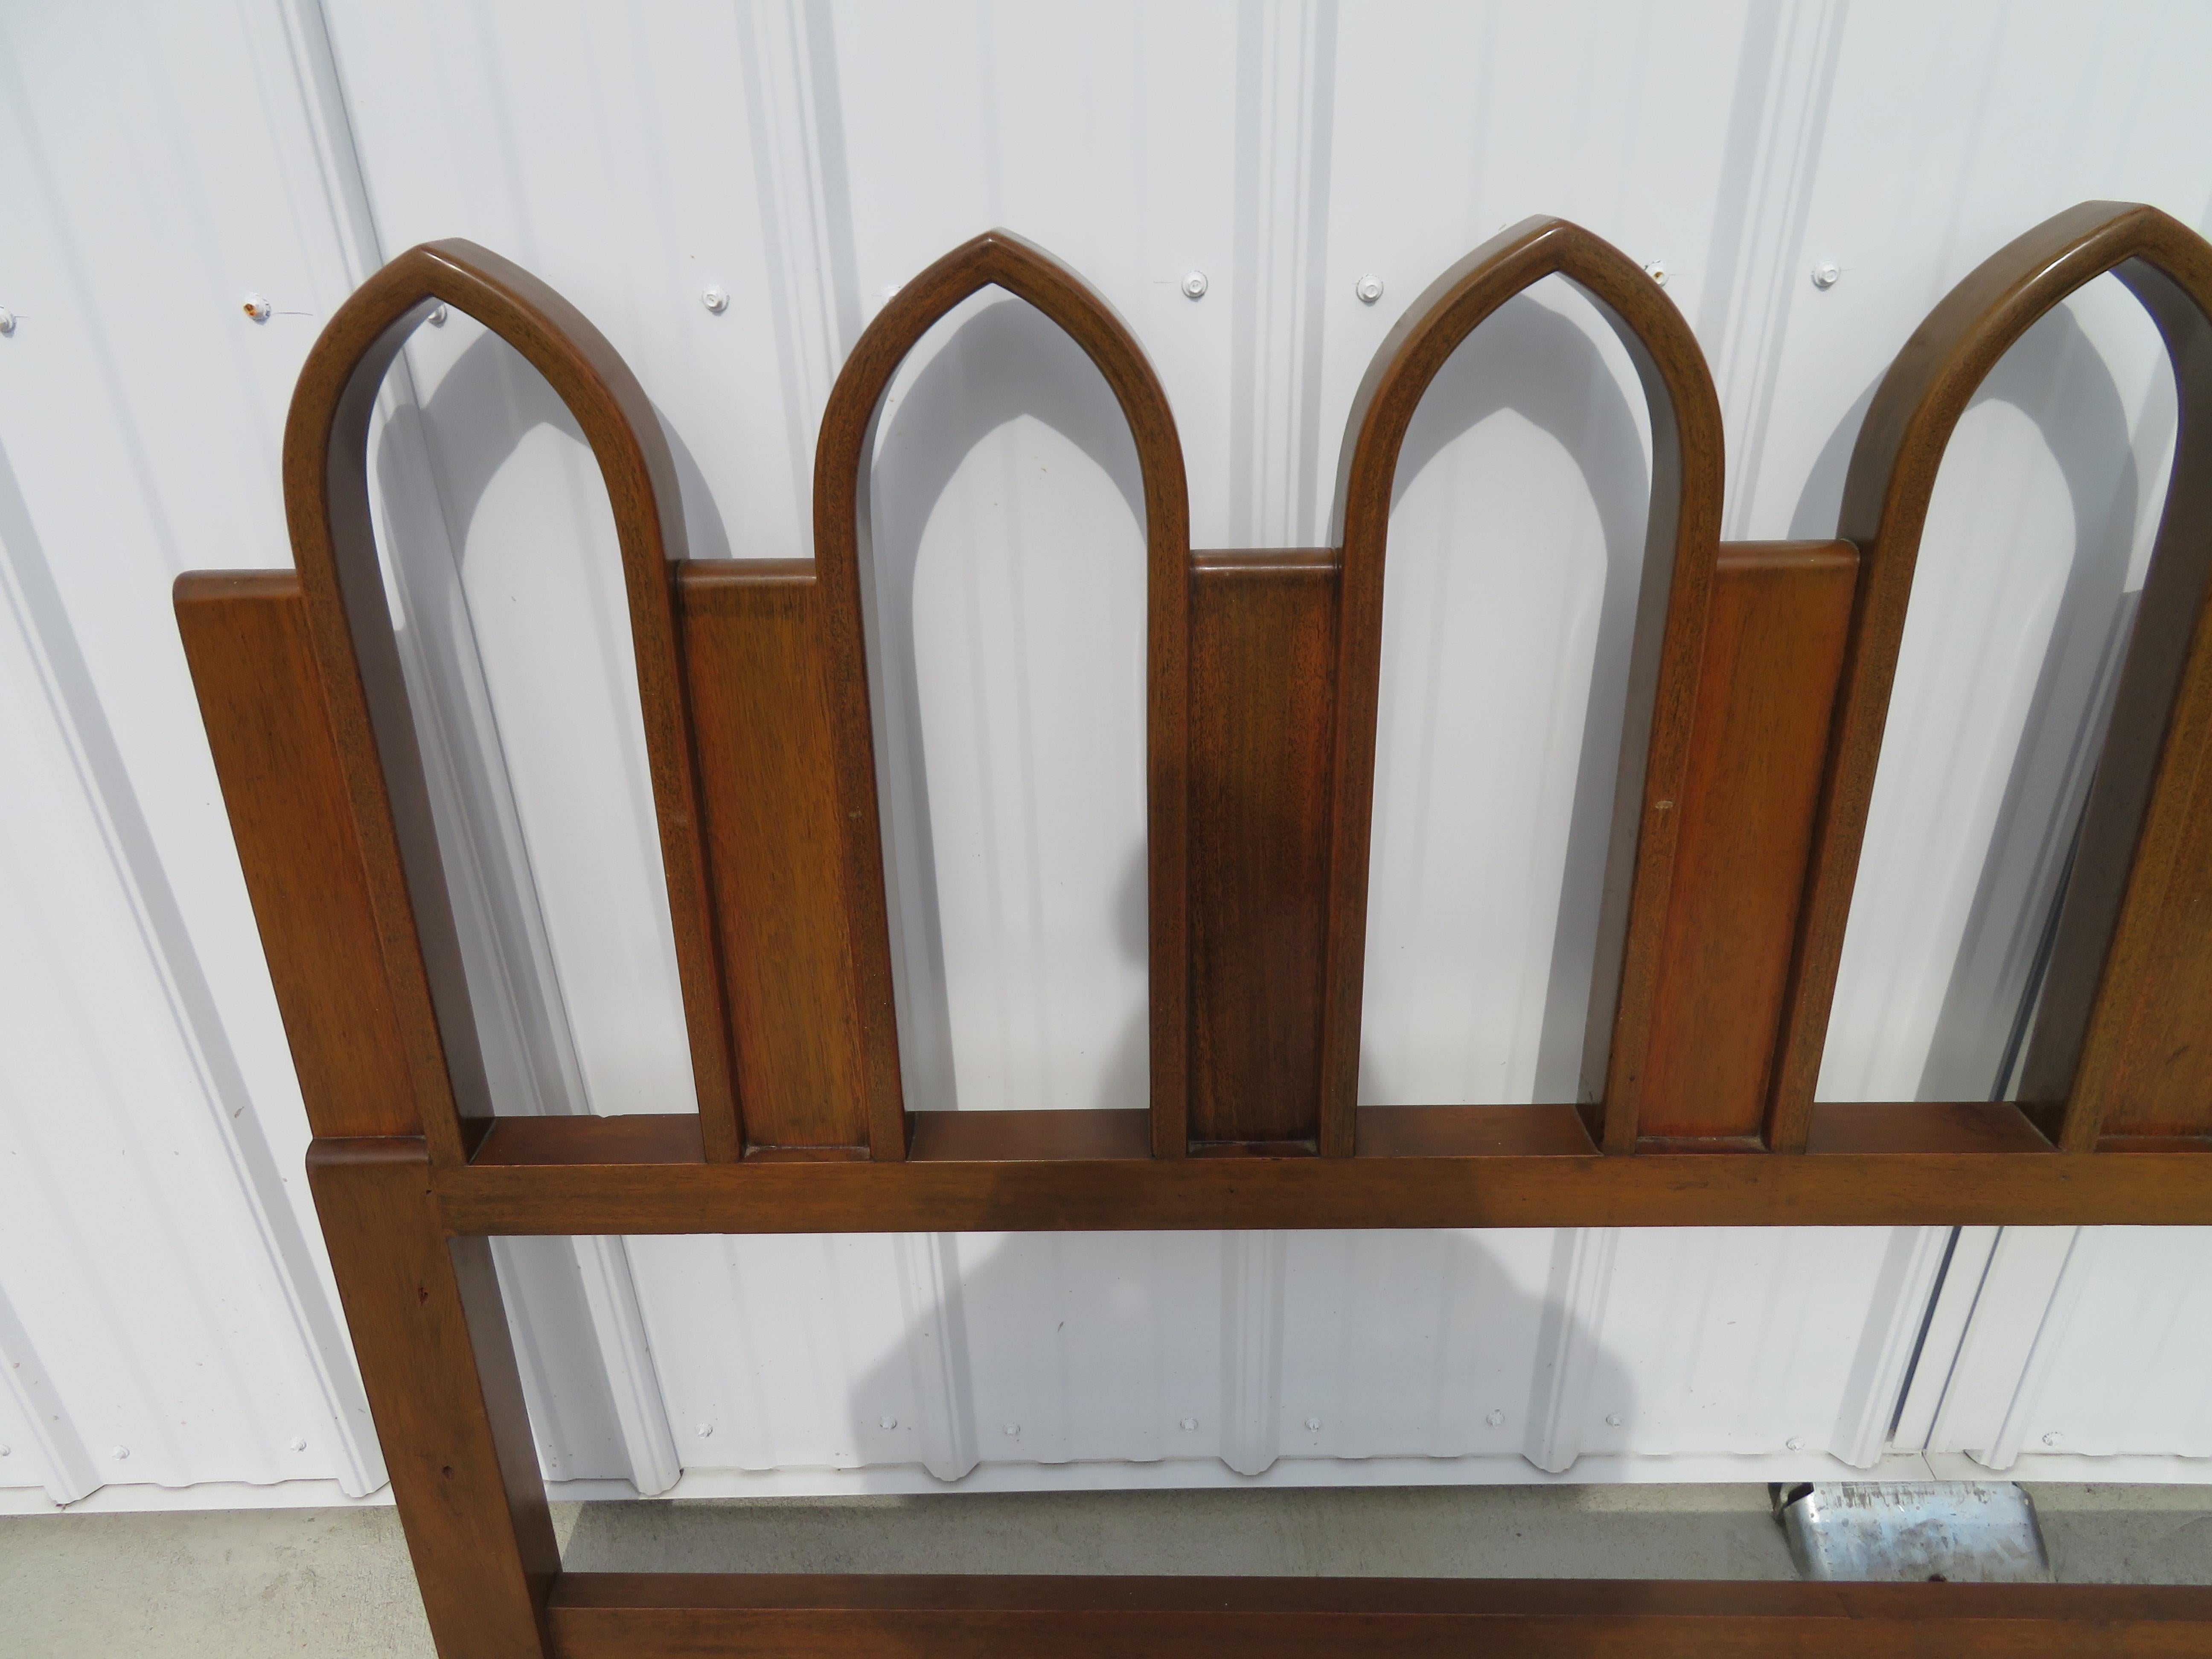 King-size headboard with walnut arches separated by natural walnut panels. Harvey Probber, circa 1950. Identically finish on the reverse side so may free-stand if desired.